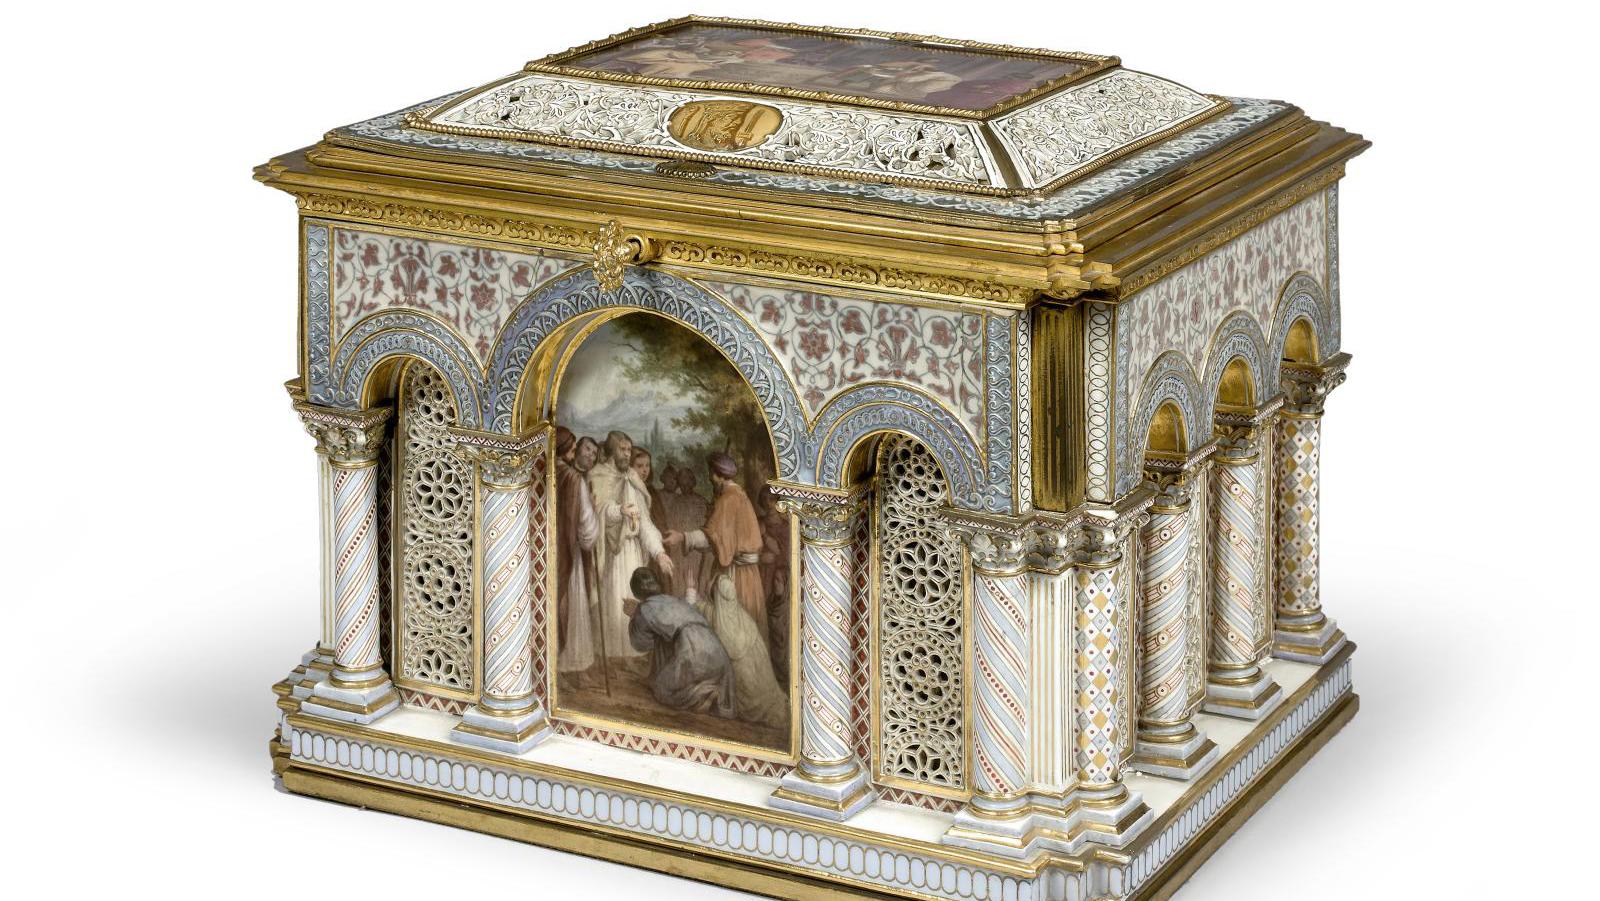 €33,020 Sèvres, c. 1846-1853. “Roman" jewelry box in hard porcelain and gilt bronze,... Art Price Index: Historicism in the 19th century